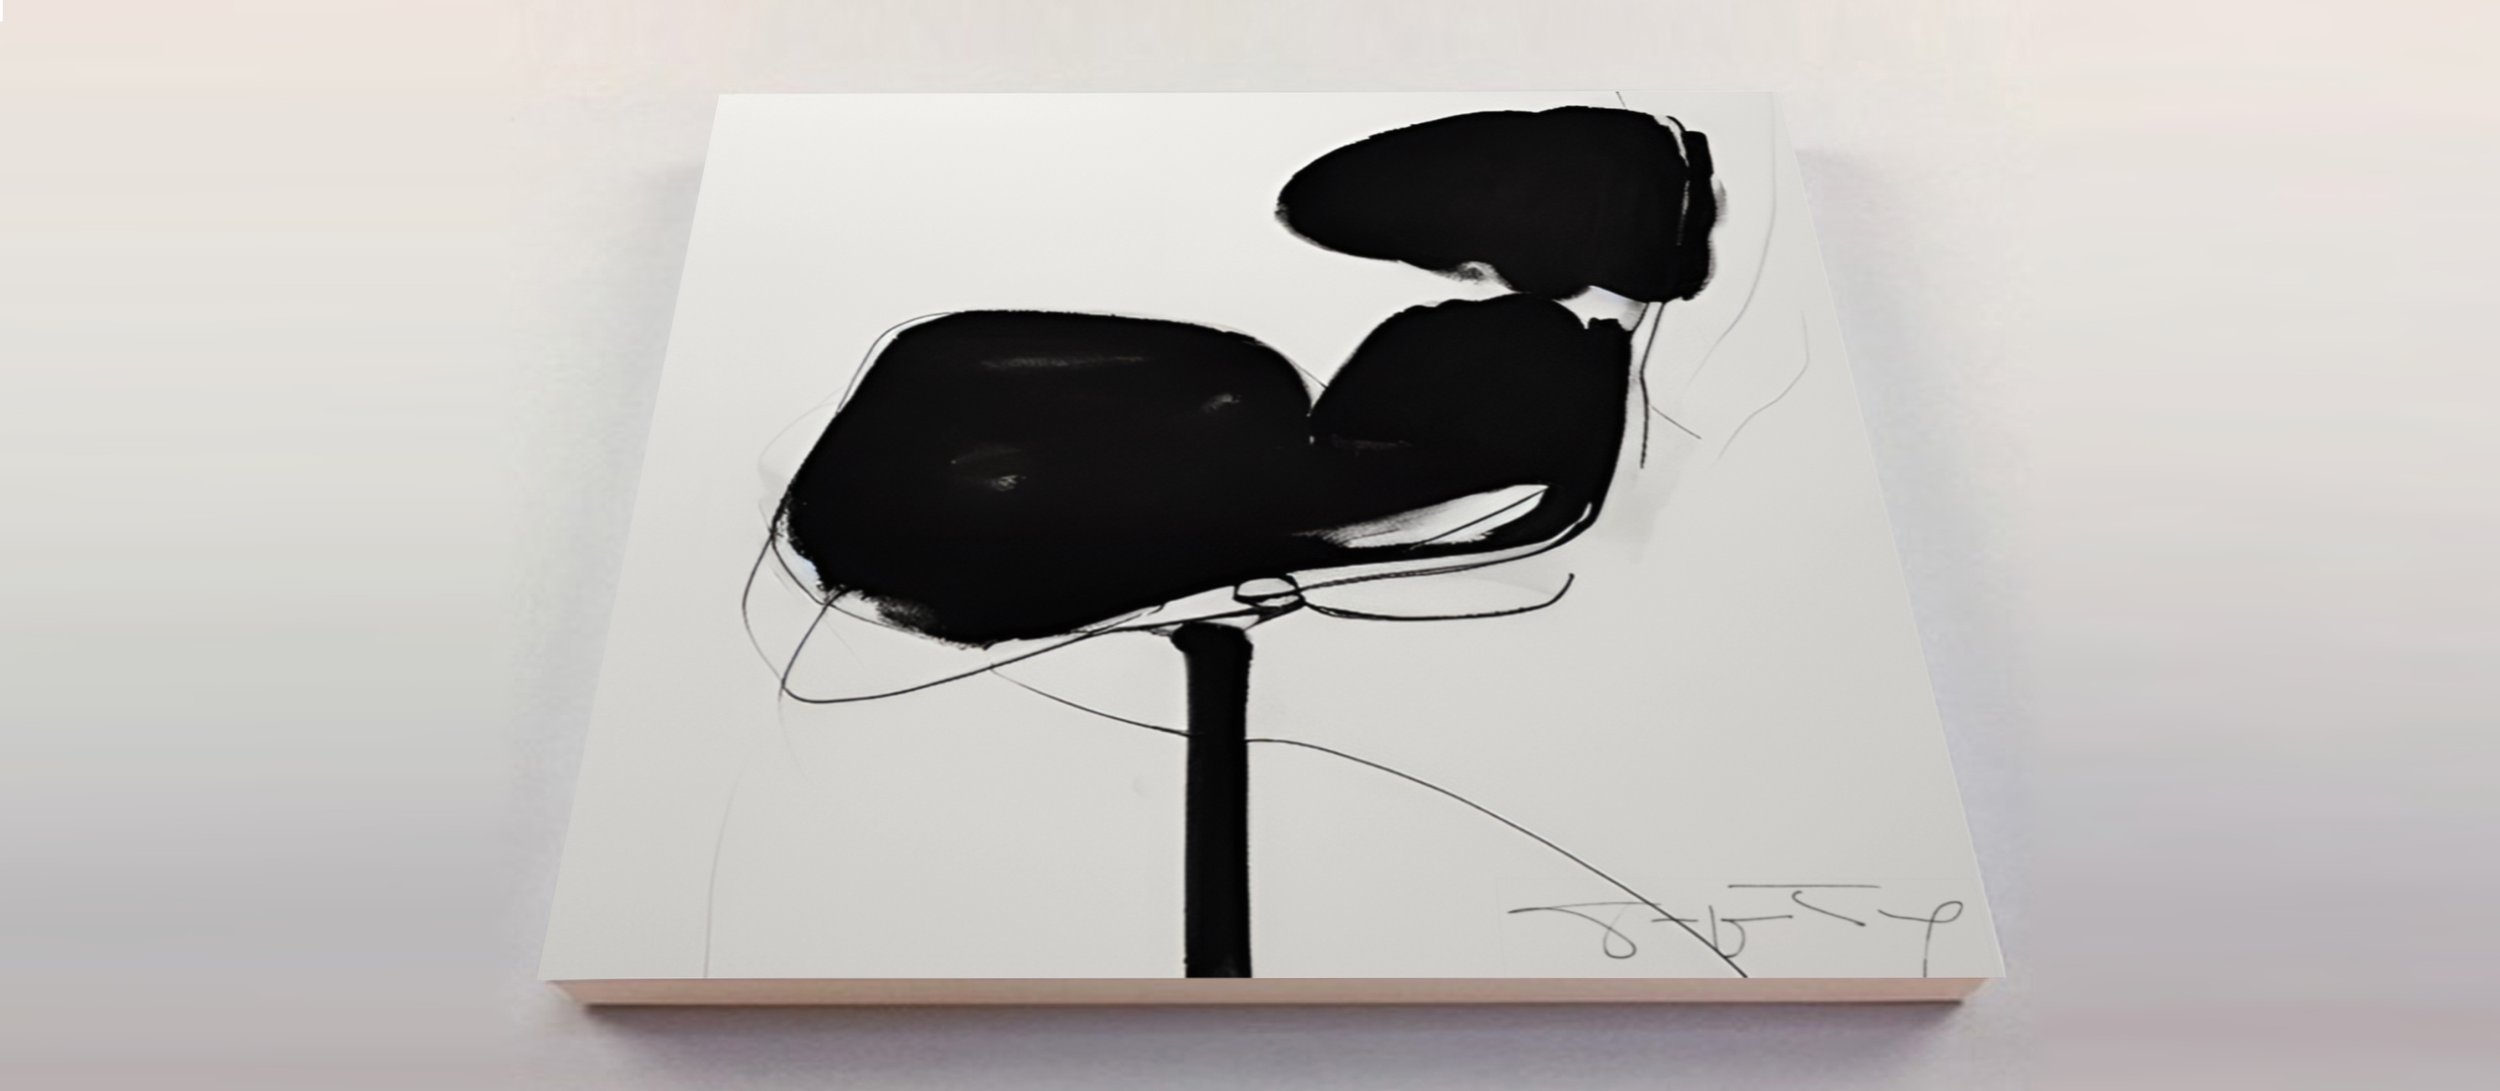 ARCHIVAL ART PRINTS | EAMES LOUNGER | (SEE SHOP SECTION FOR PURCHASE DETAILS)